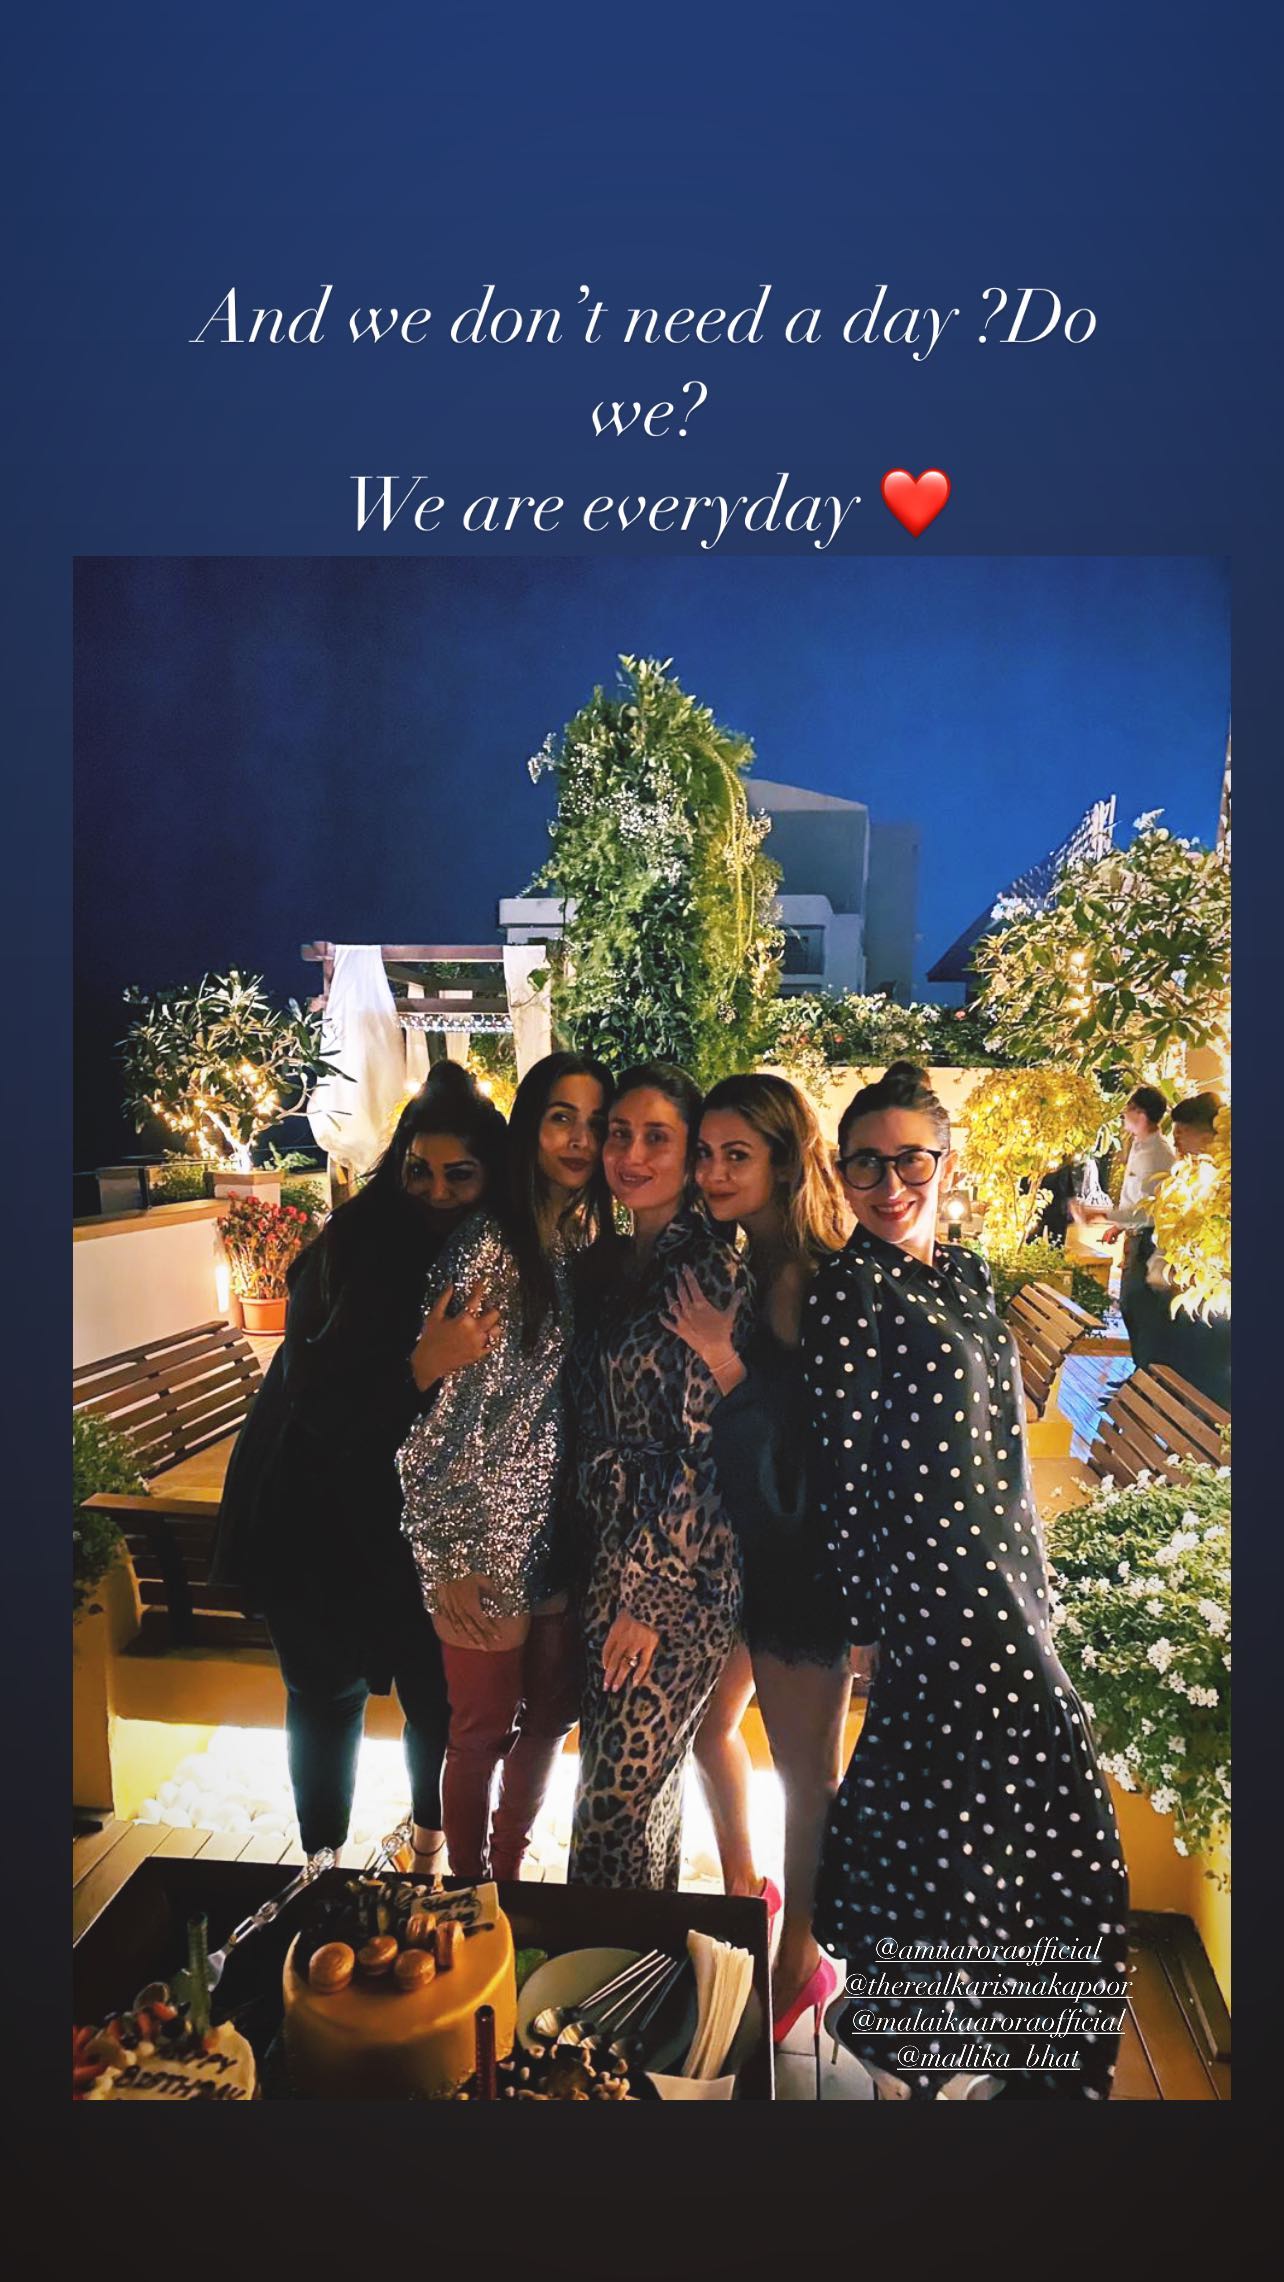 Kareena Kapoor Khan shares a picture with her girl gang